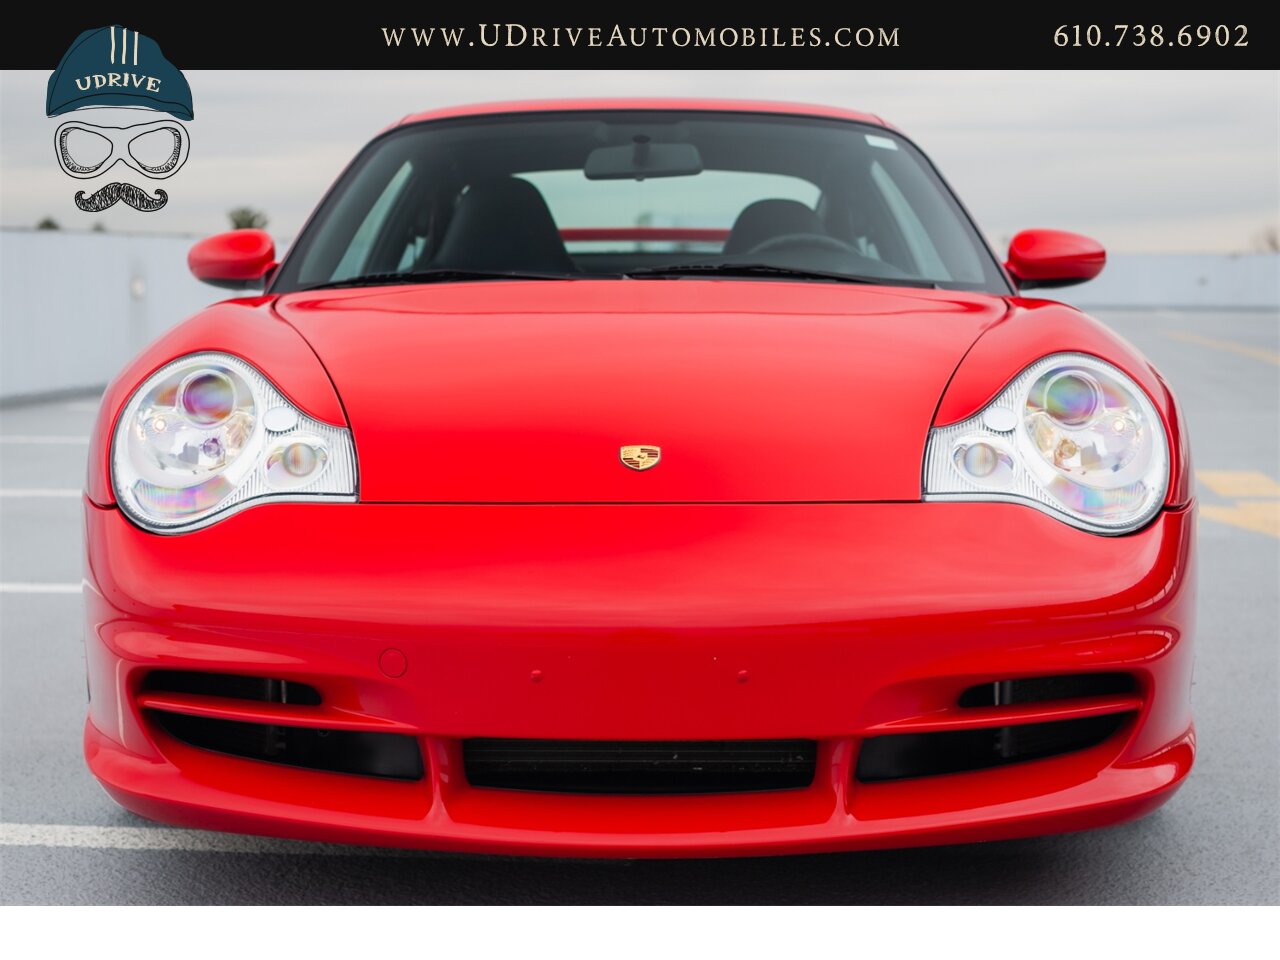 2004 Porsche 911 996 GT3 Guards Red Sport Seats Painted Hardbacks  Painted Center Console 18k Miles - Photo 14 - West Chester, PA 19382